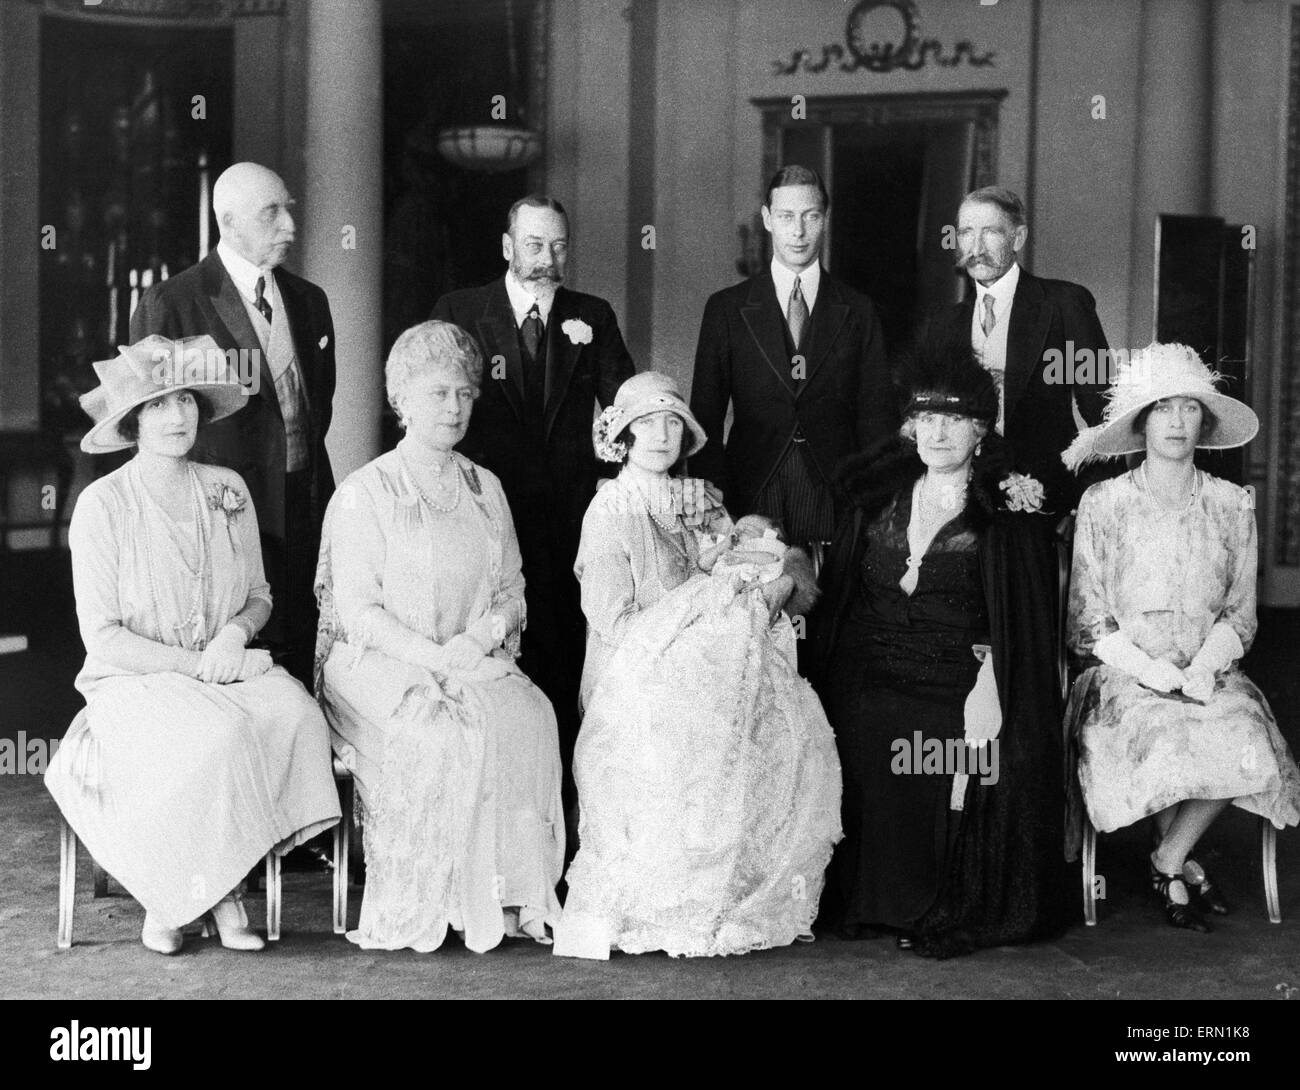 The duke and Duchess of York, (the future King George VI and Queen Elizabeth) pose with their baby daughter Princess Elizabeth at her christening ceremony at Buckingham Palace surrounded by family members King George V, Queen Mary, the Duke of Connaught, Princess Mary and the Earl and Countess of Strathmore. May 1926. Stock Photo